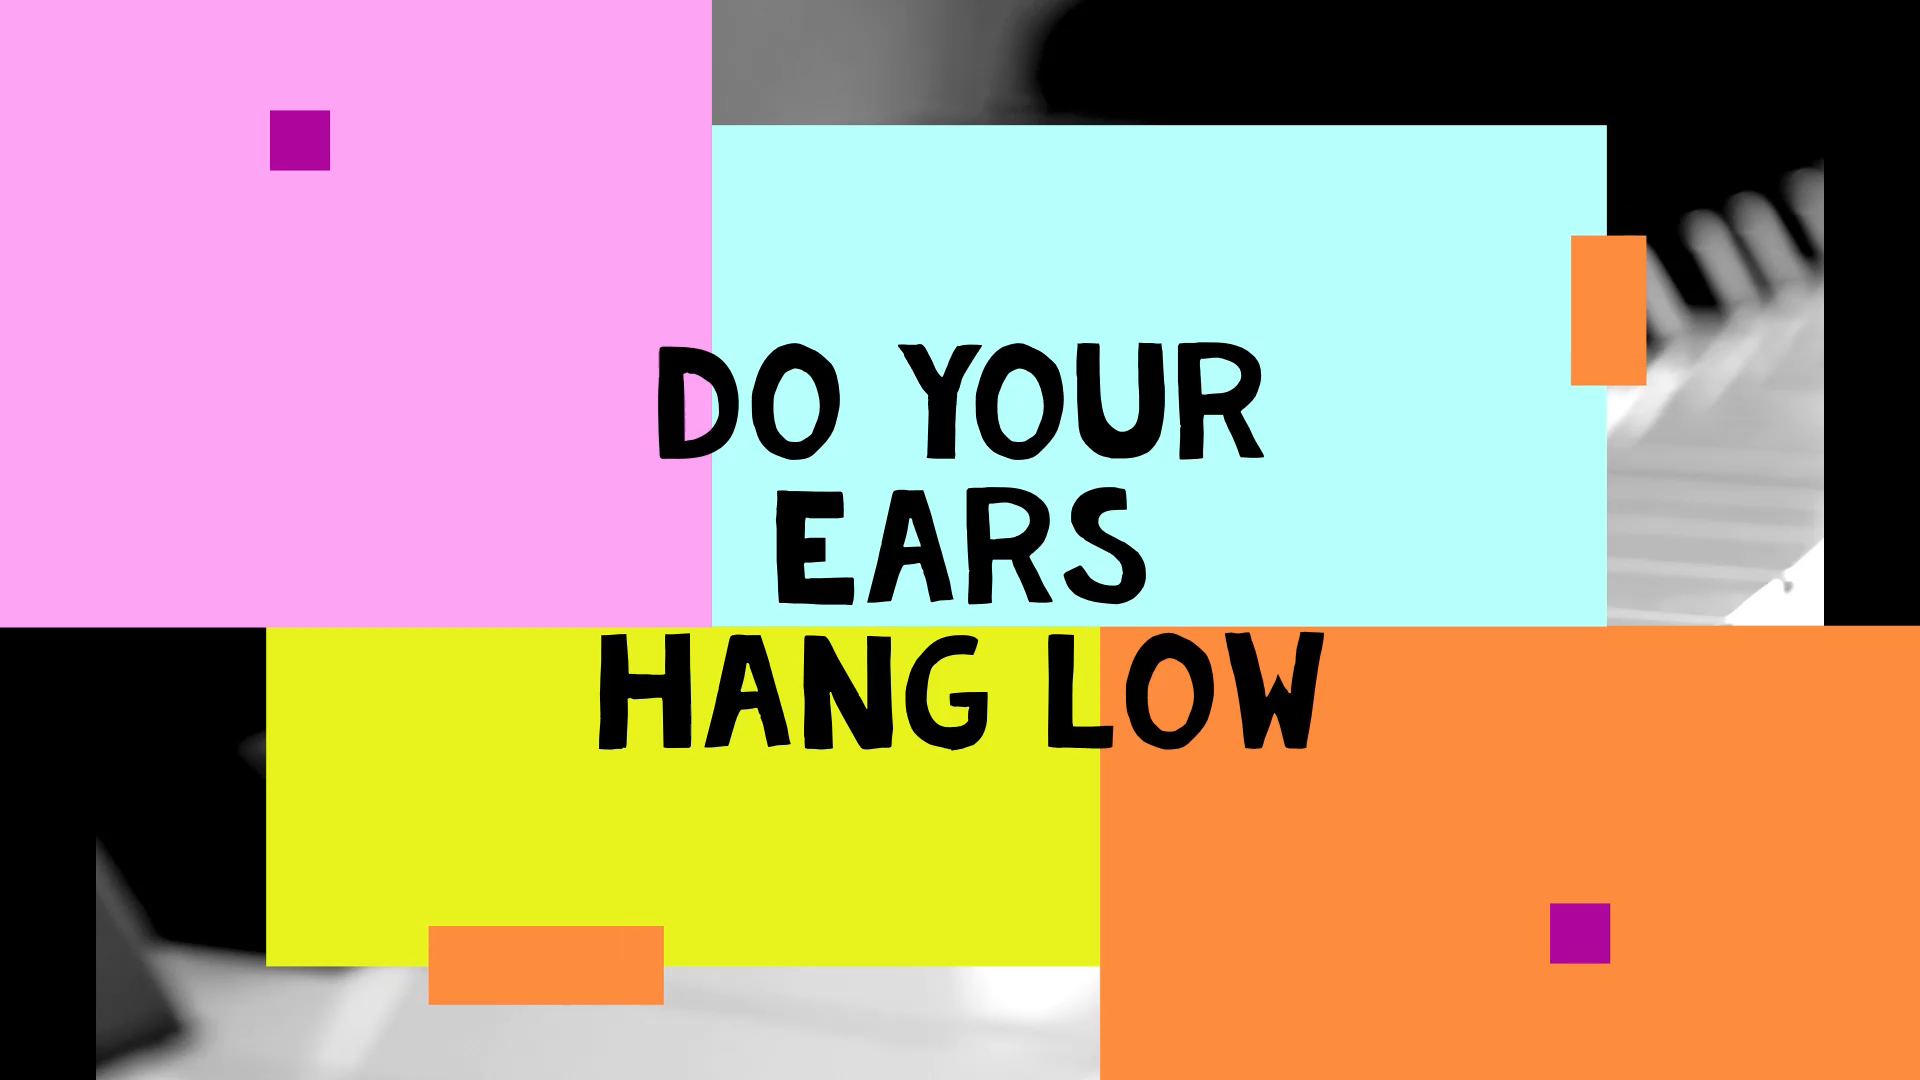 Do your ears hang low remix